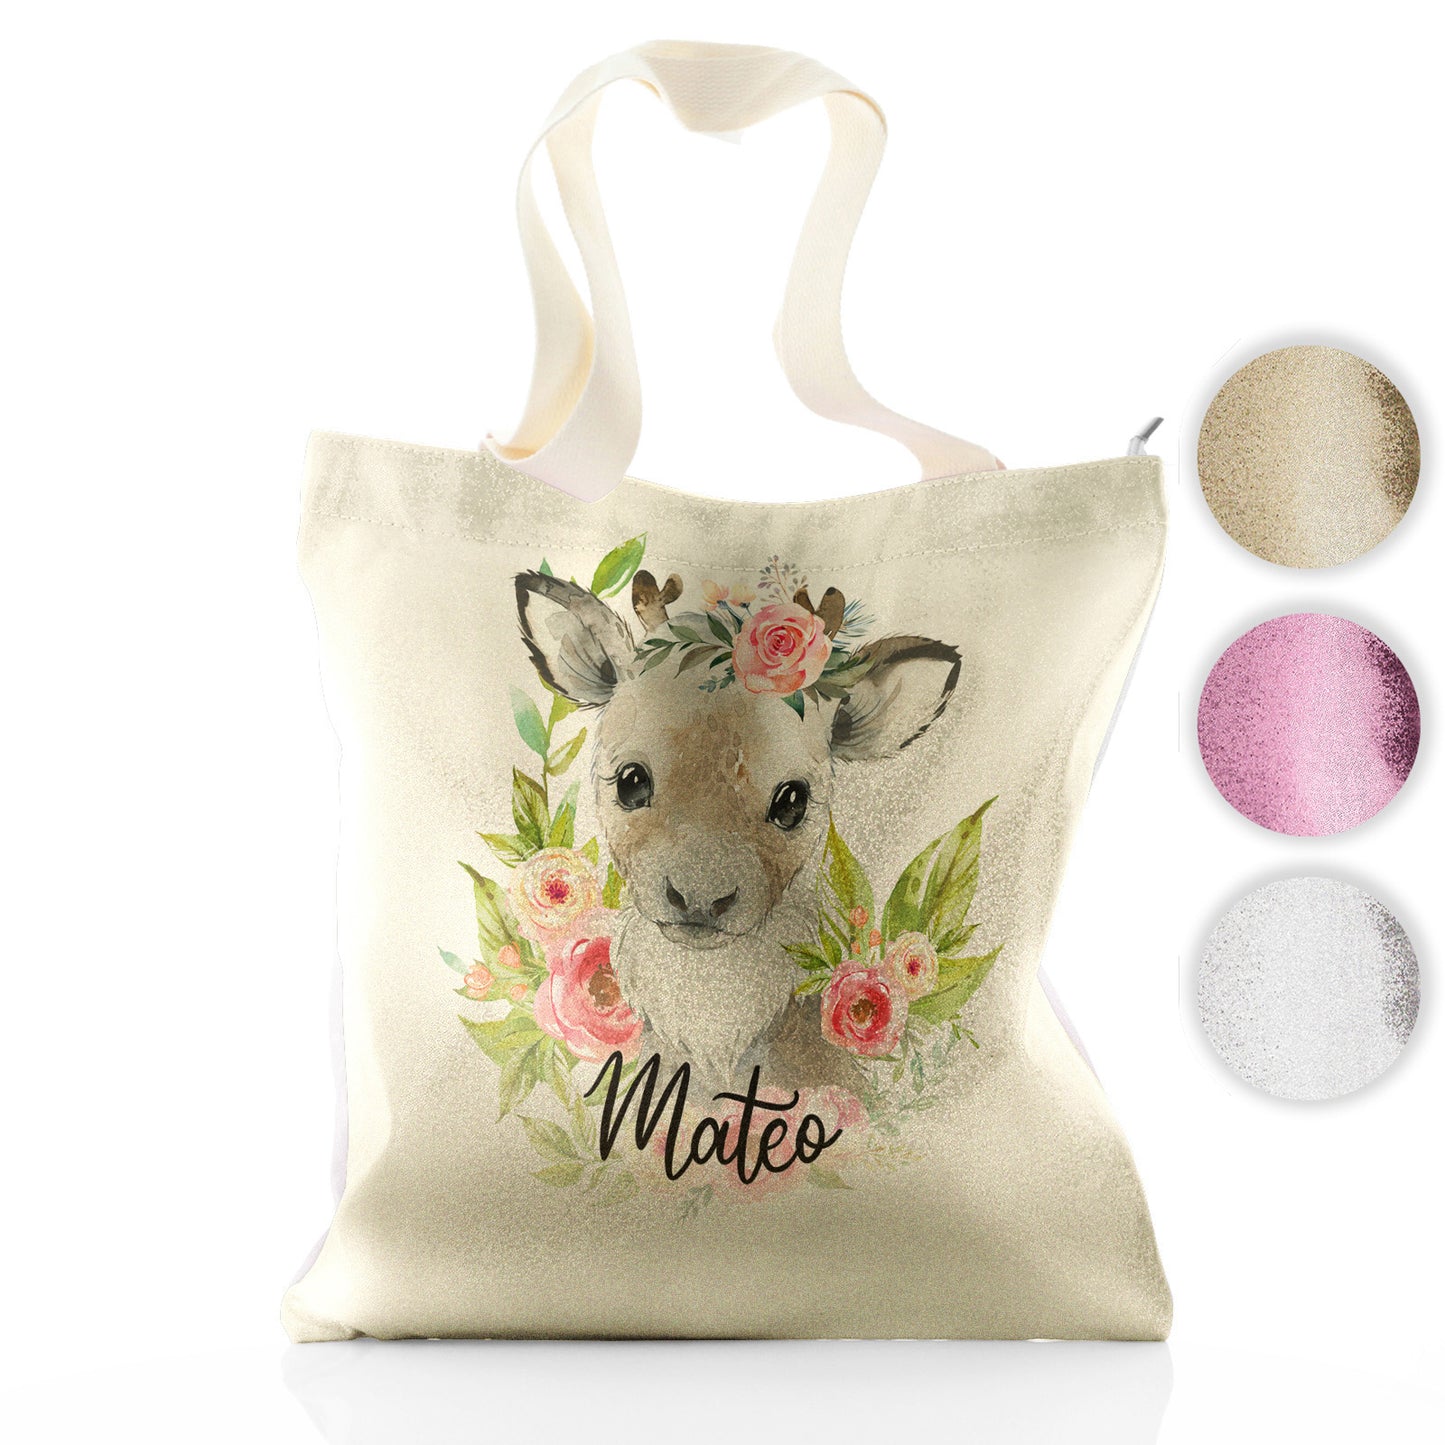 Personalised Glitter Tote Bag with Reindeer Pink Flowers and Cute Text